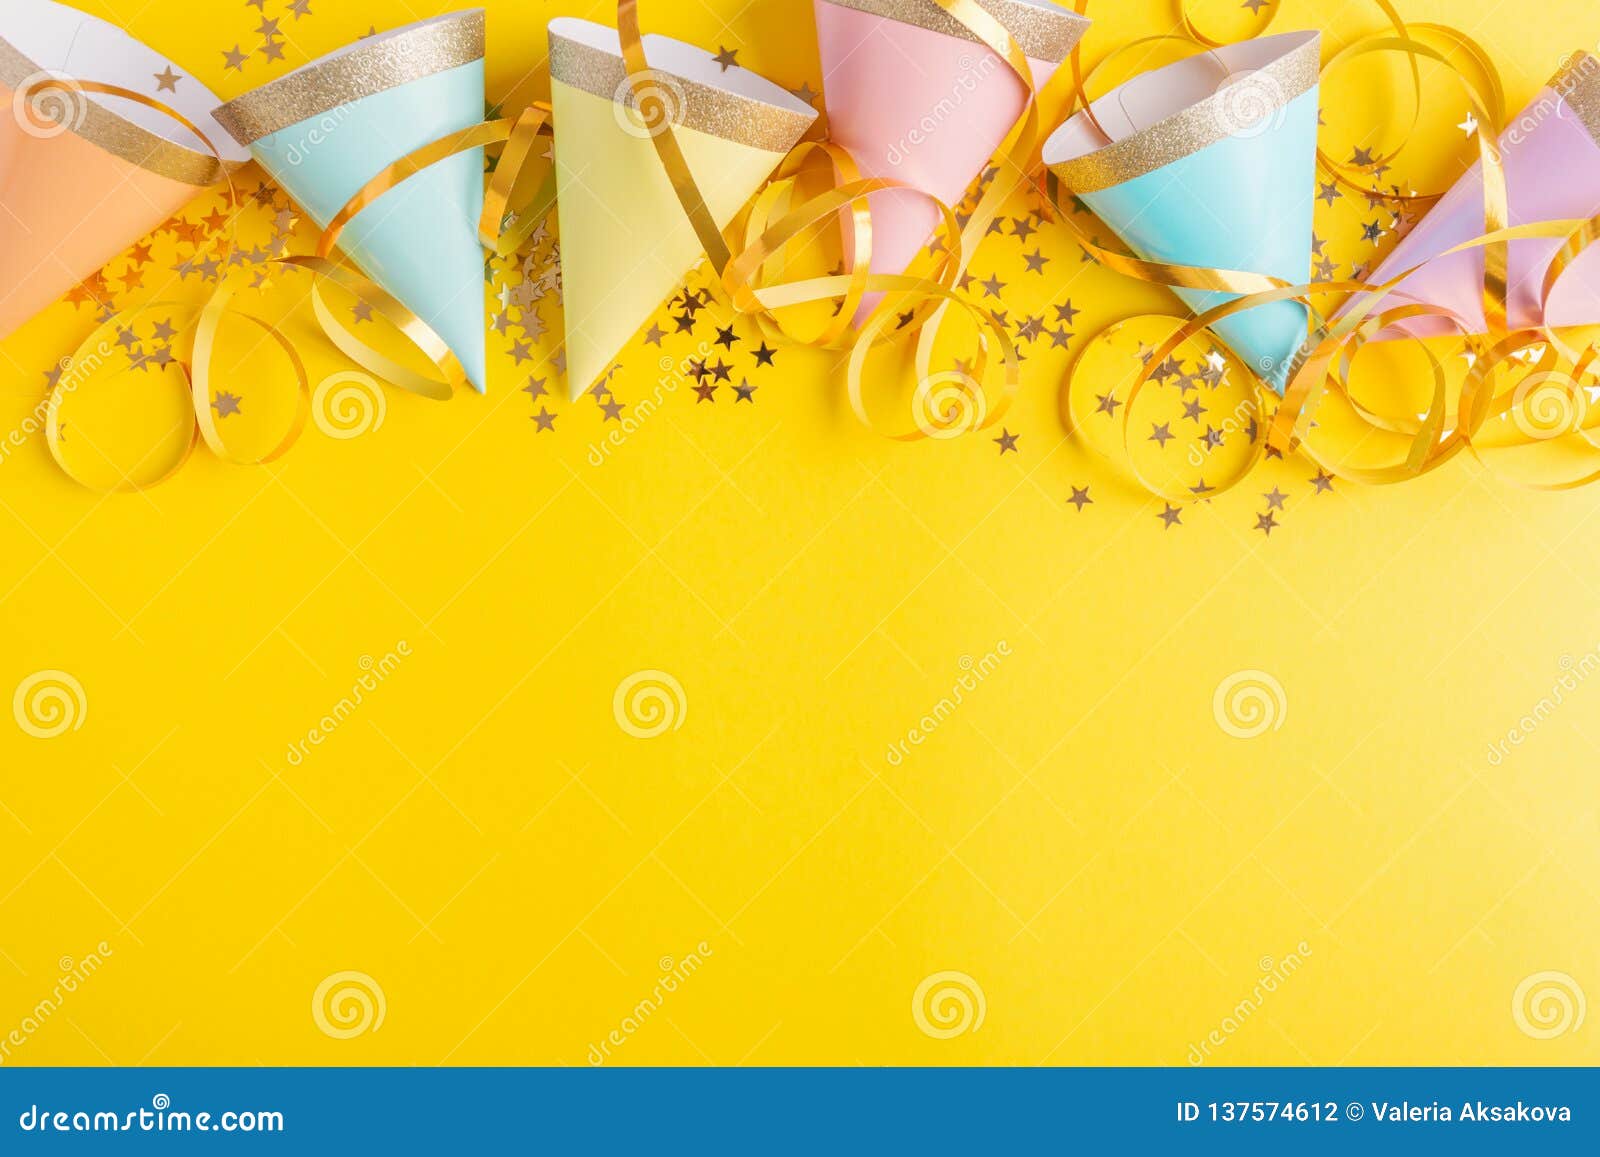 Birthday Party Background on Yellow Stock Photo - Image of festive,  colorful: 137574612